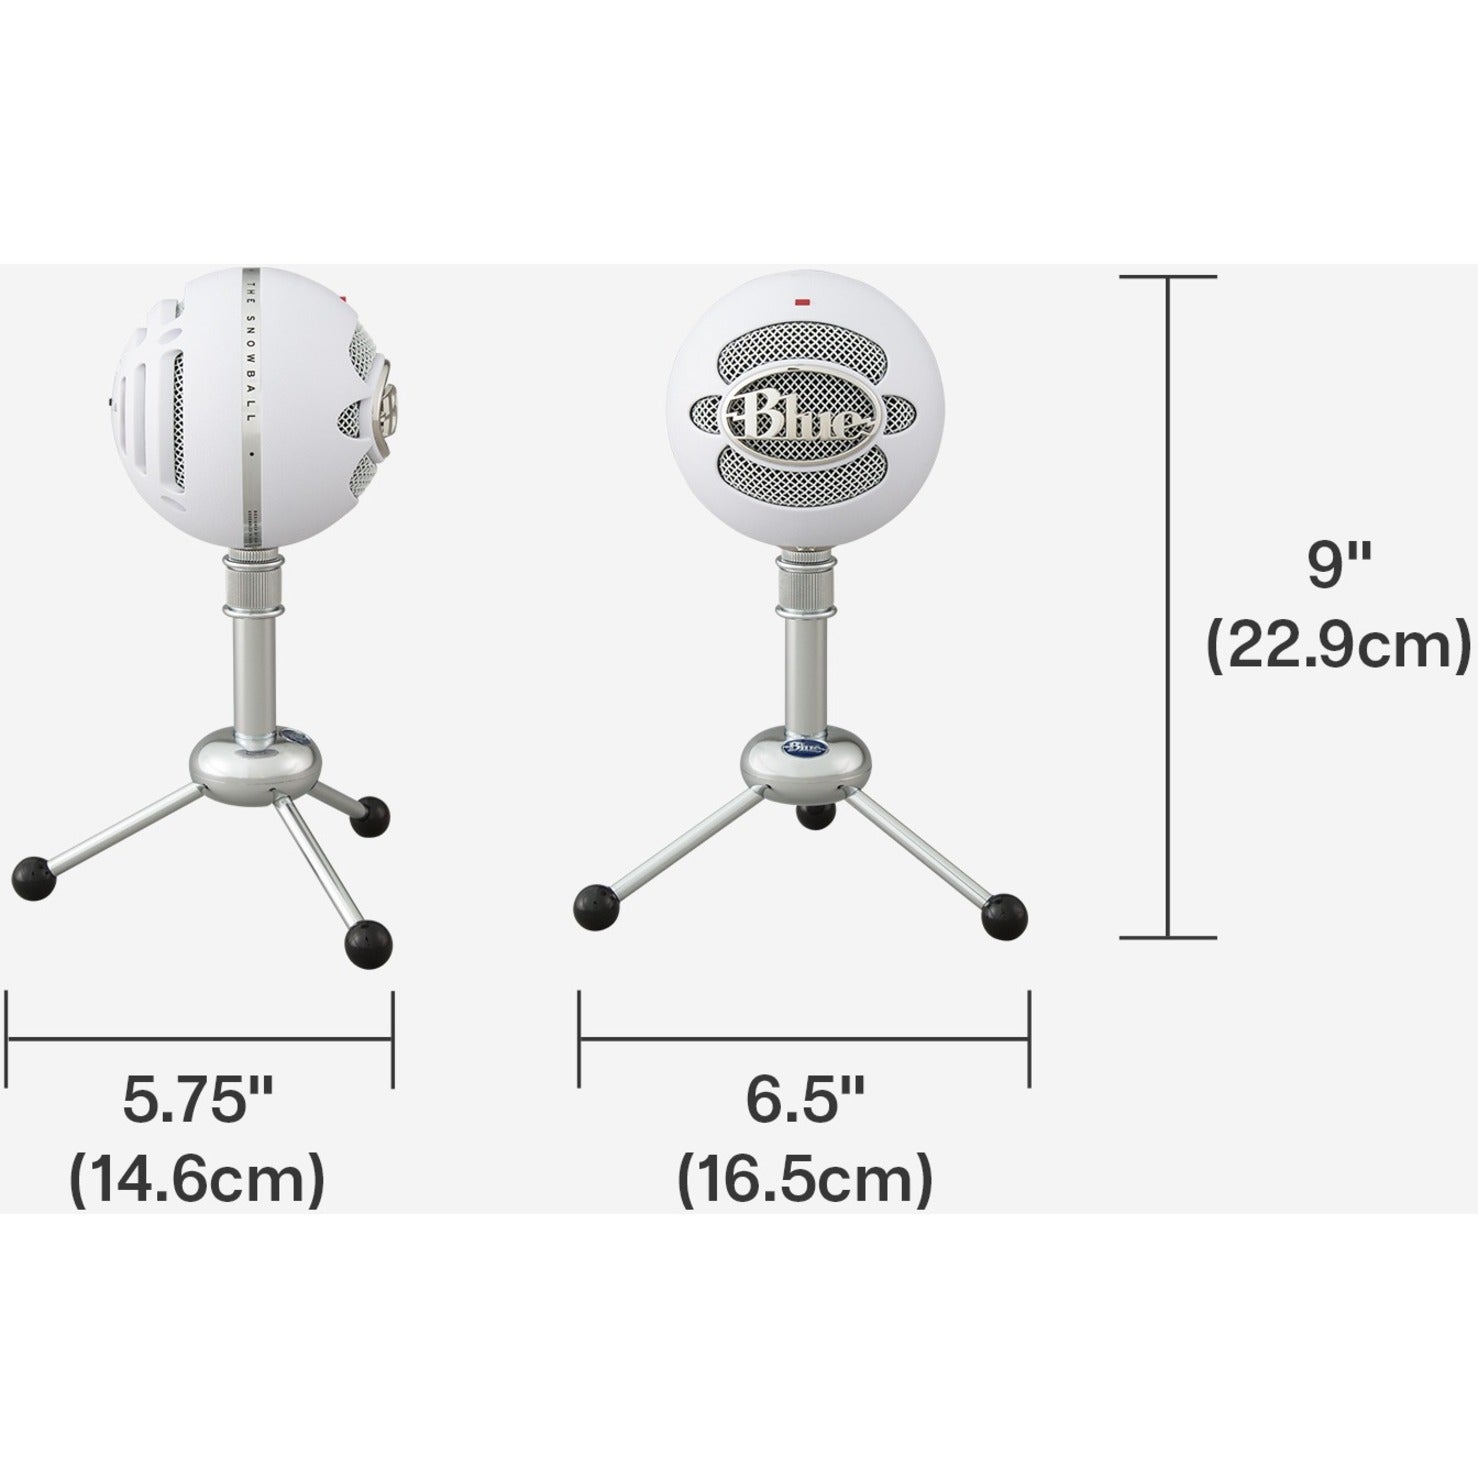 Blue 988-000073 Snowball Classic Studio-Quality USB Microphone, 2 Year Limited Warranty, Cardioid & Omni-directional Polar Pattern, Stand Mountable, Condenser Technology